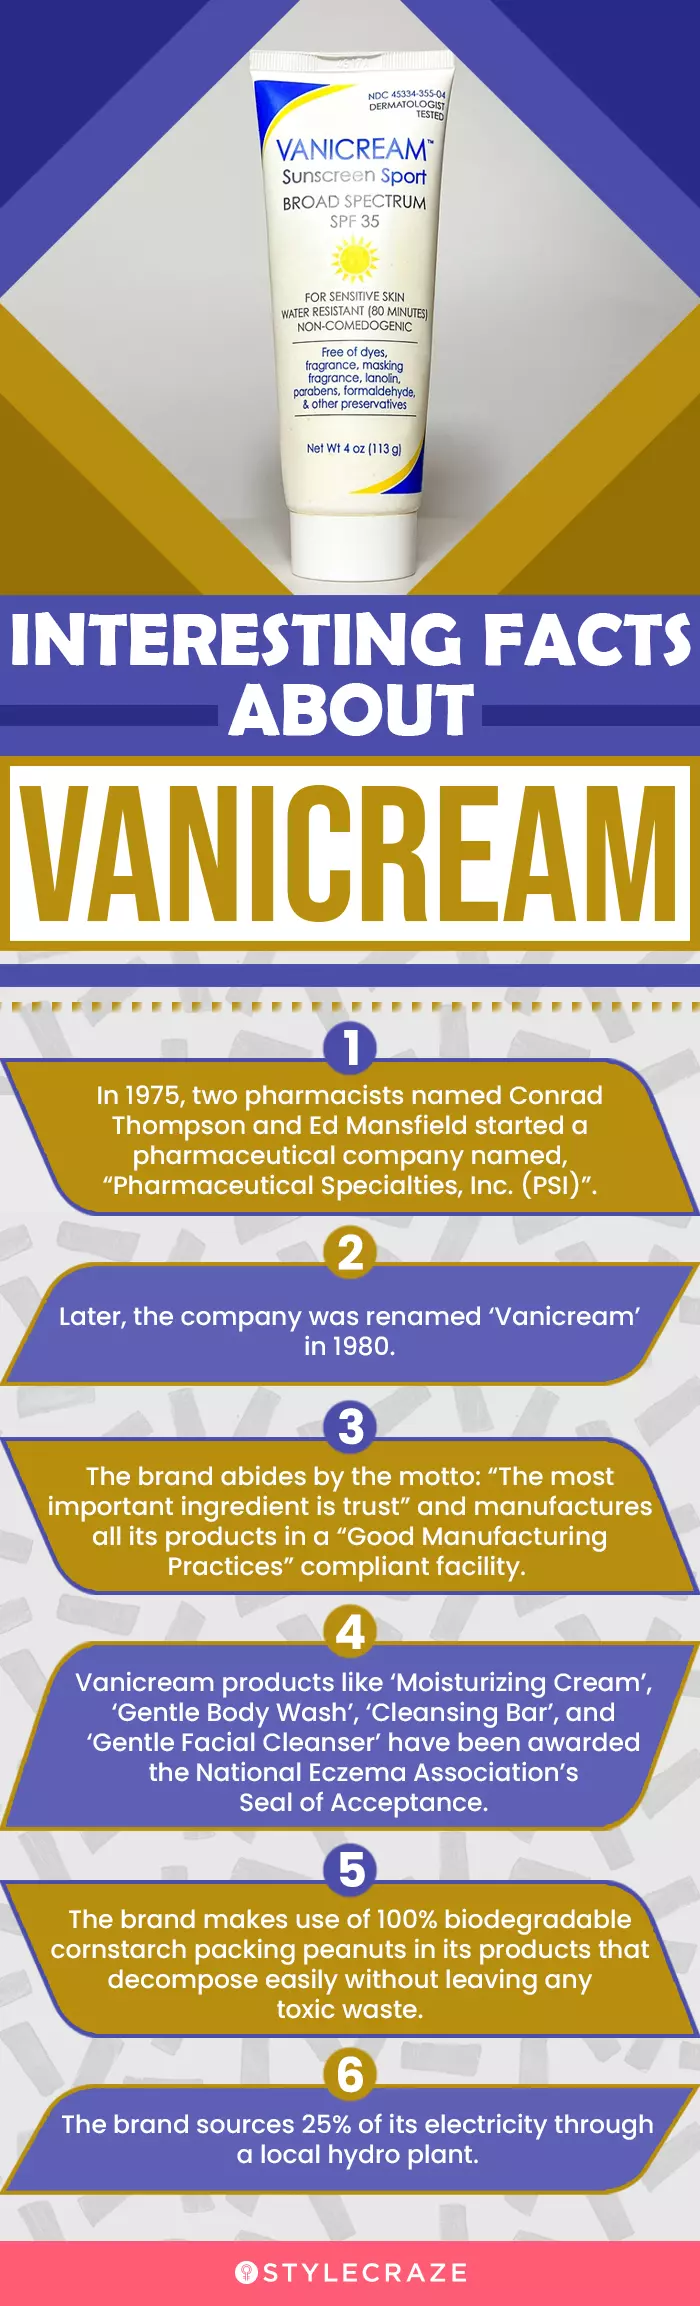 Interesting Facts About Vanicream (infographic)